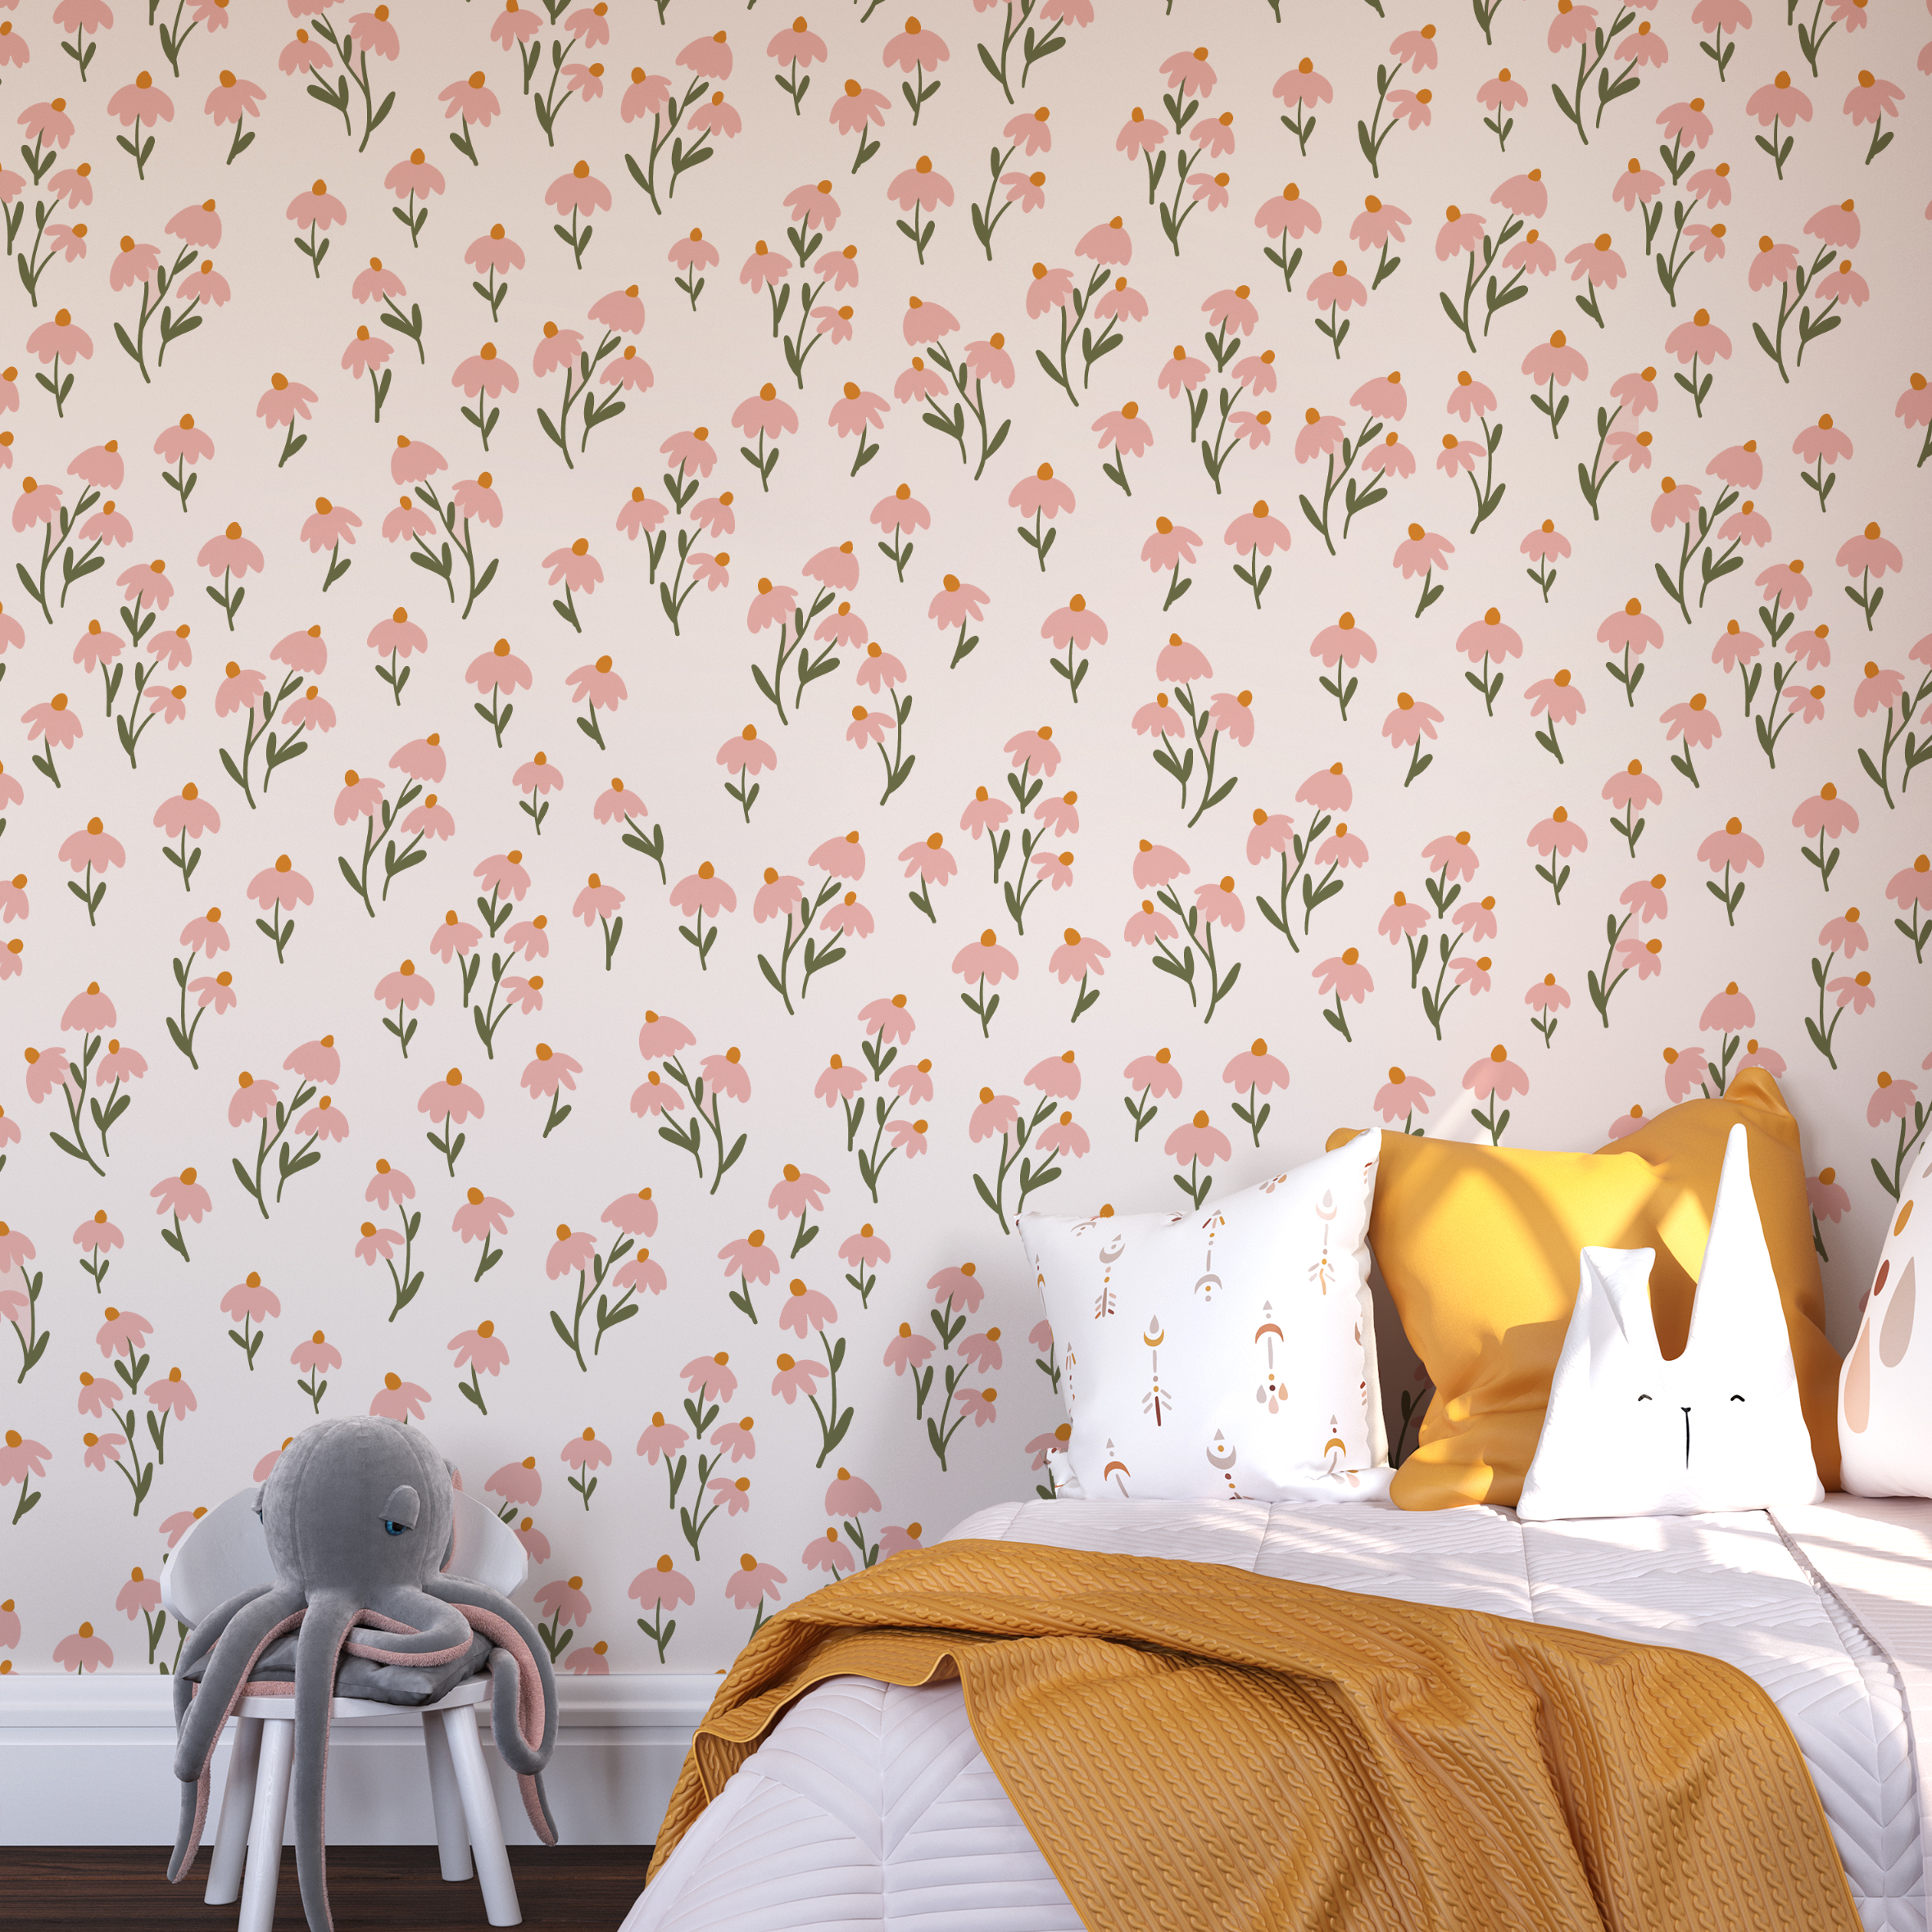 A child's room featuring the Floral Love Wallpaper- Pink on the wall, creating a heartwarming and inviting atmosphere. The wall is adorned with playful pillows, including one with the affectionate phrase "You are so very loved," alongside a cozy yellow blanket and a rattan peacock chair.